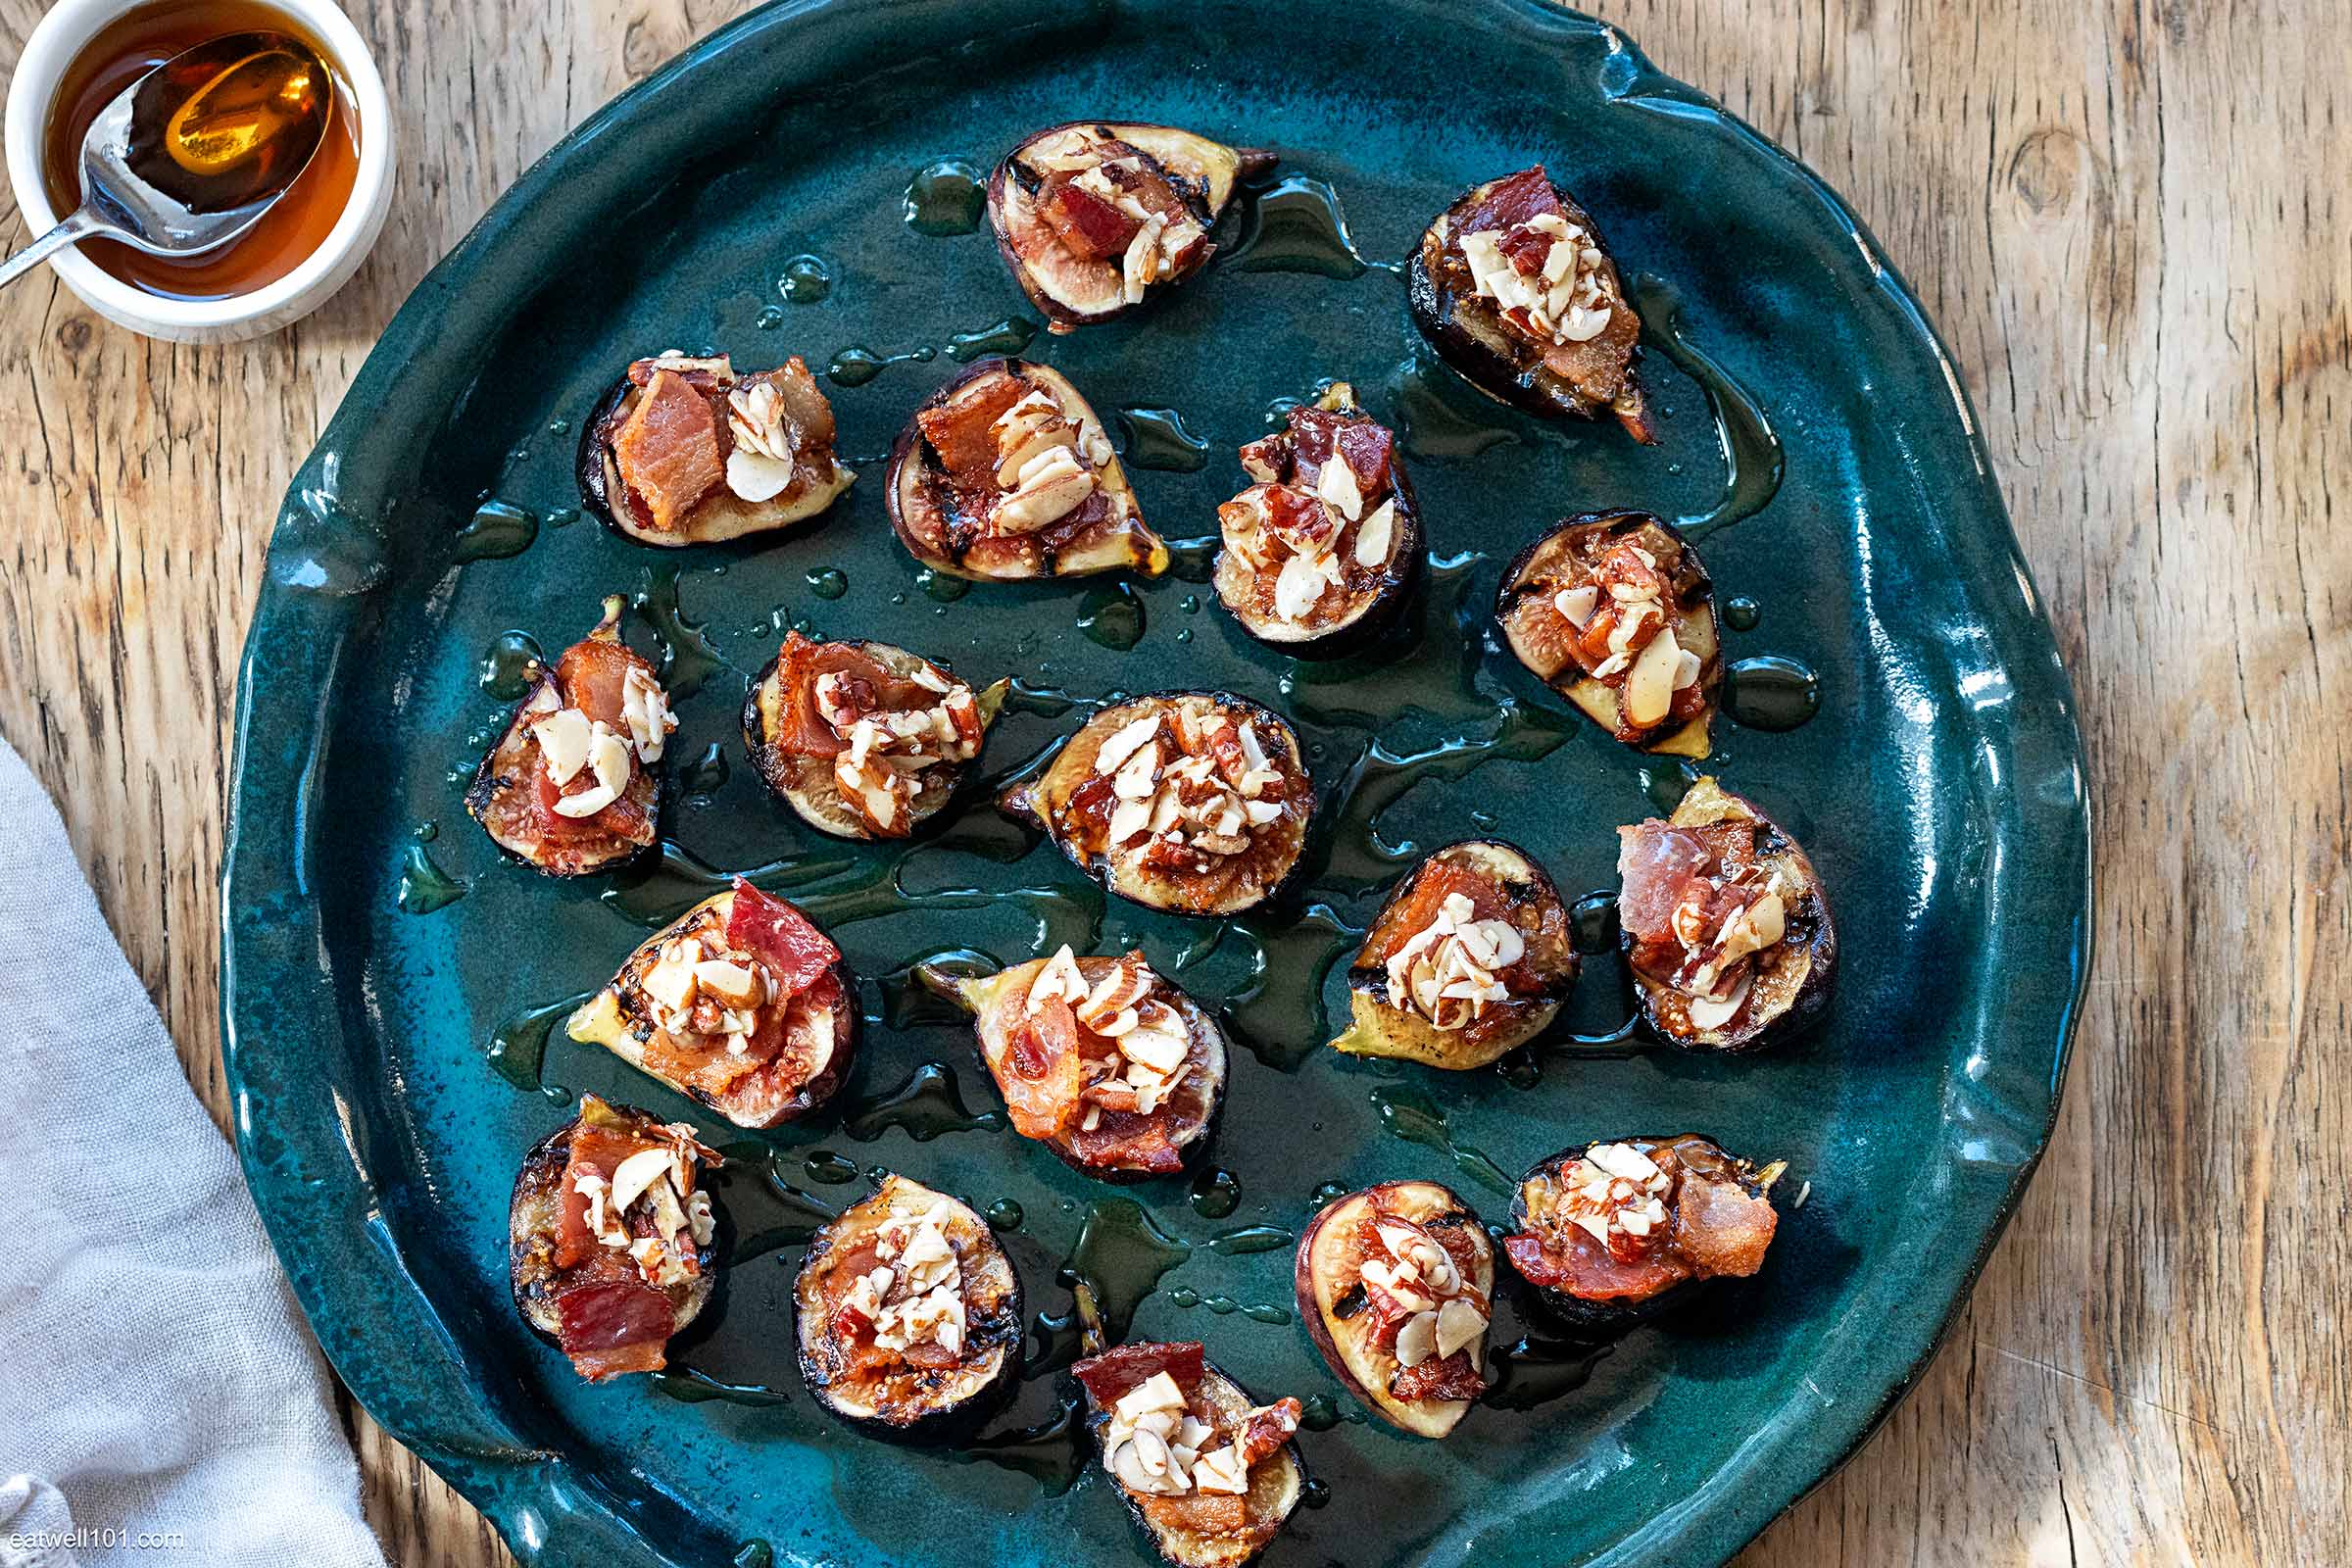 Grilled Figs with Bacon and Maple Syrup